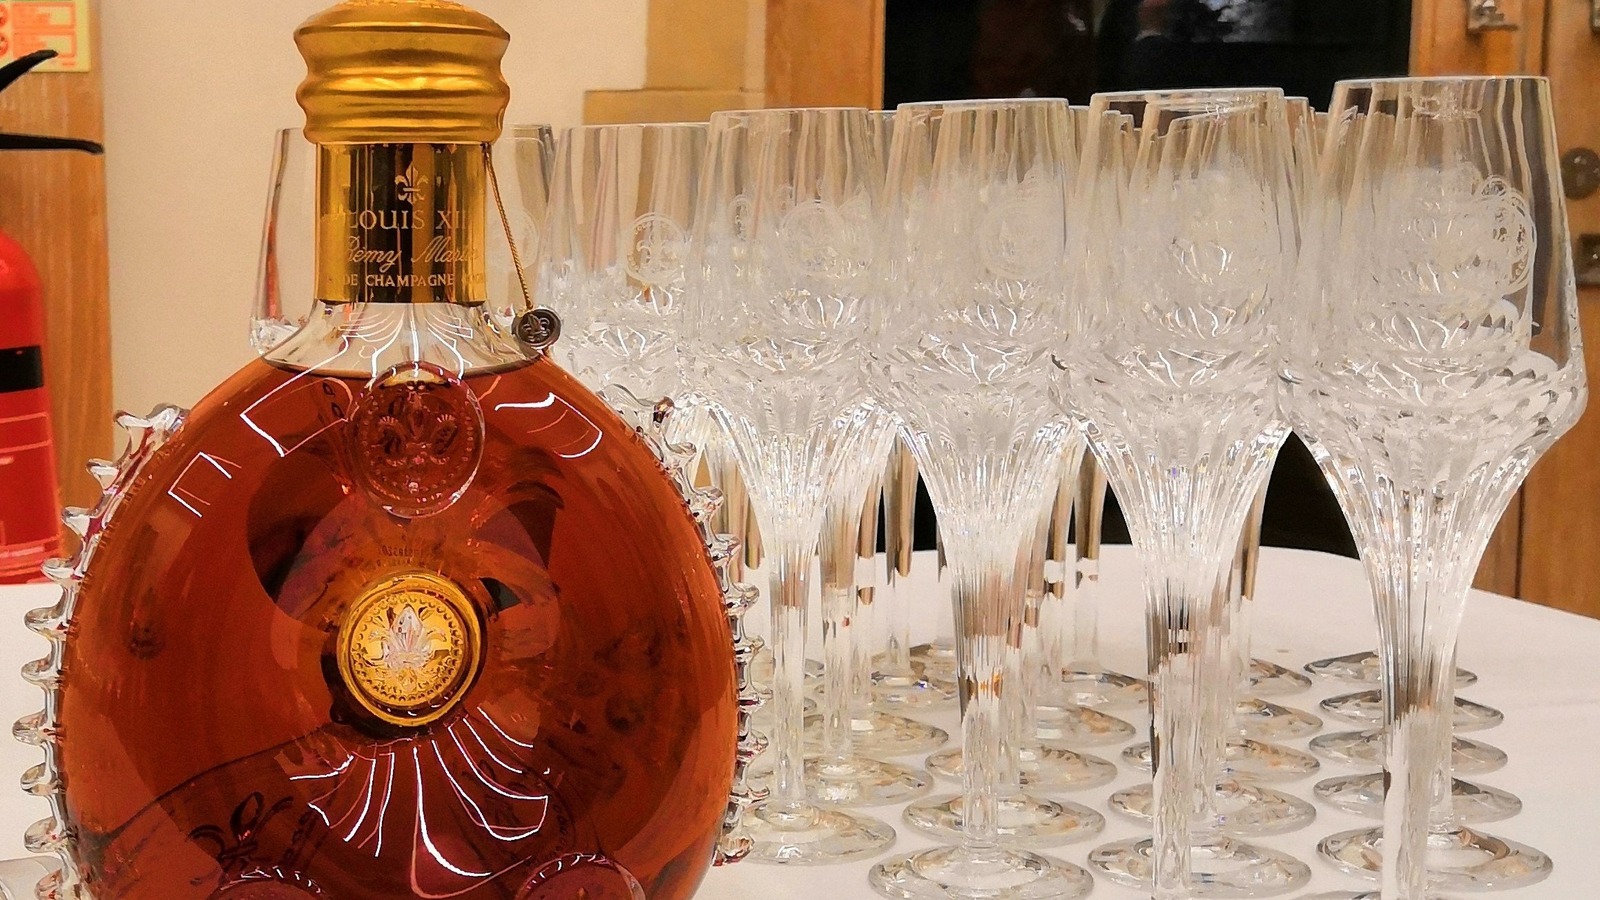 You can order a $40,000 bottle of Cognac at The Peninsula Beverly Hills -  Los Angeles Times